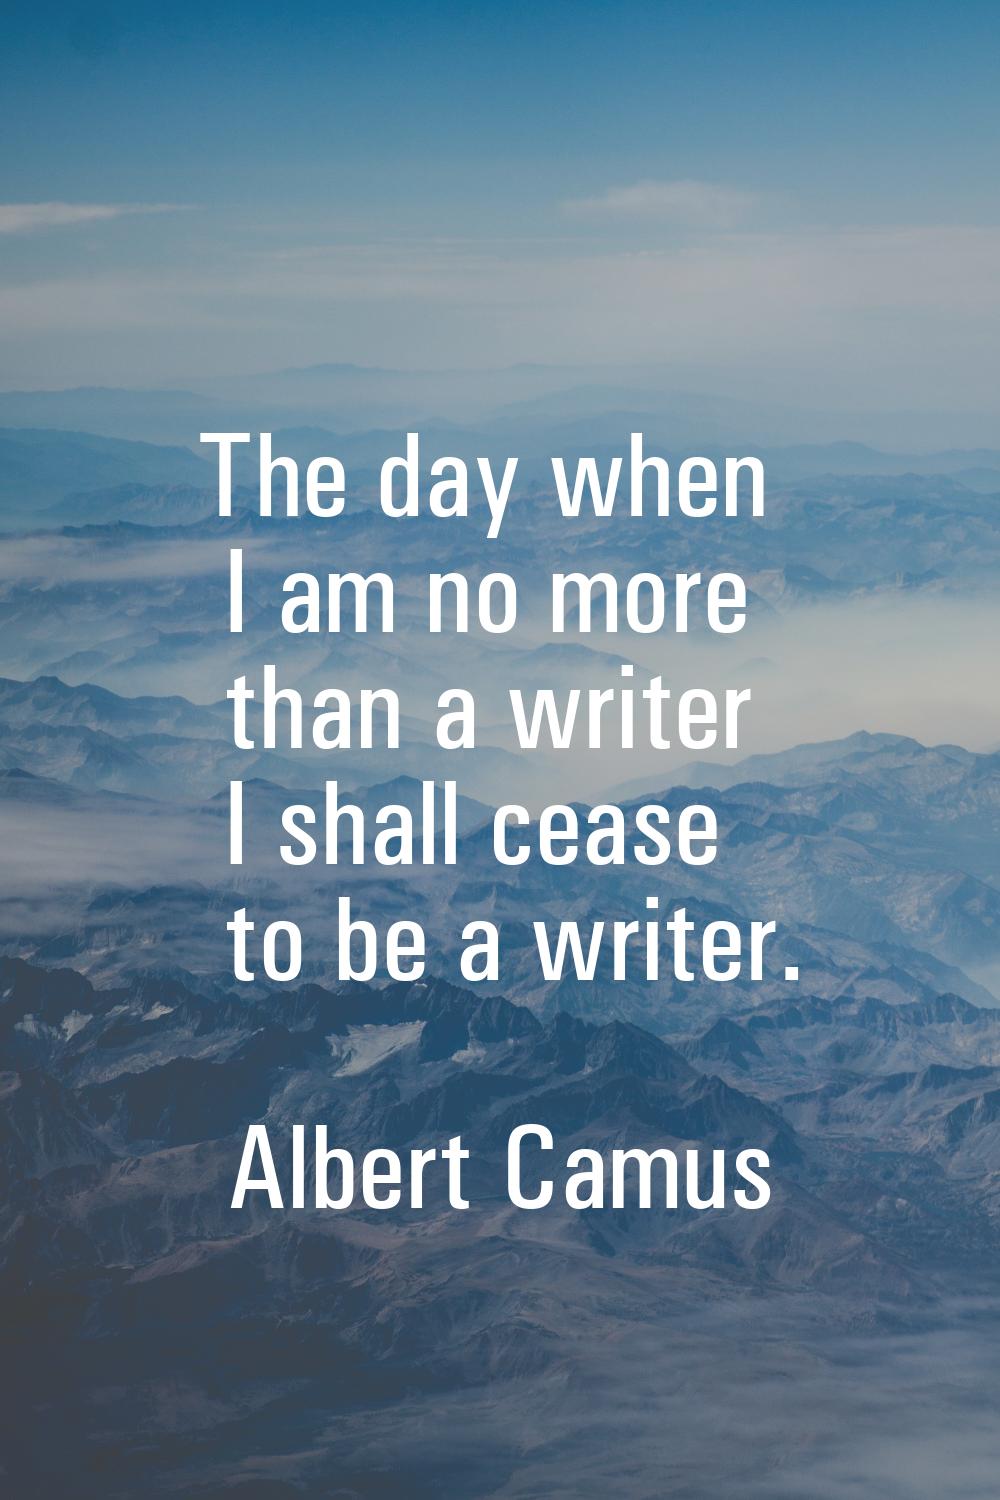 The day when I am no more than a writer I shall cease to be a writer.